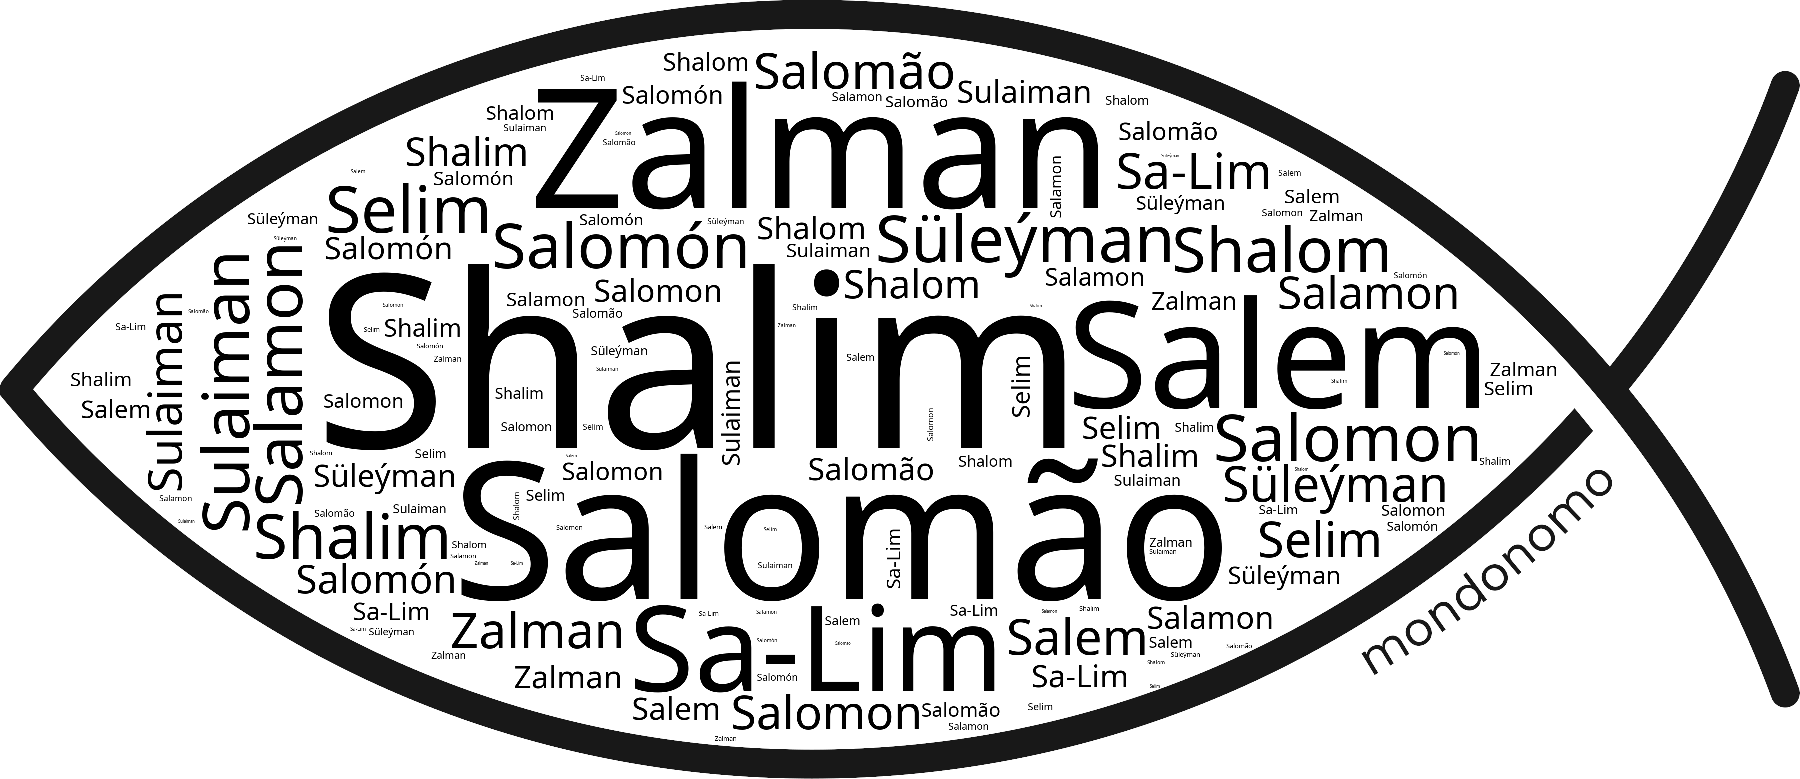 Name Shalim in the world's Bibles